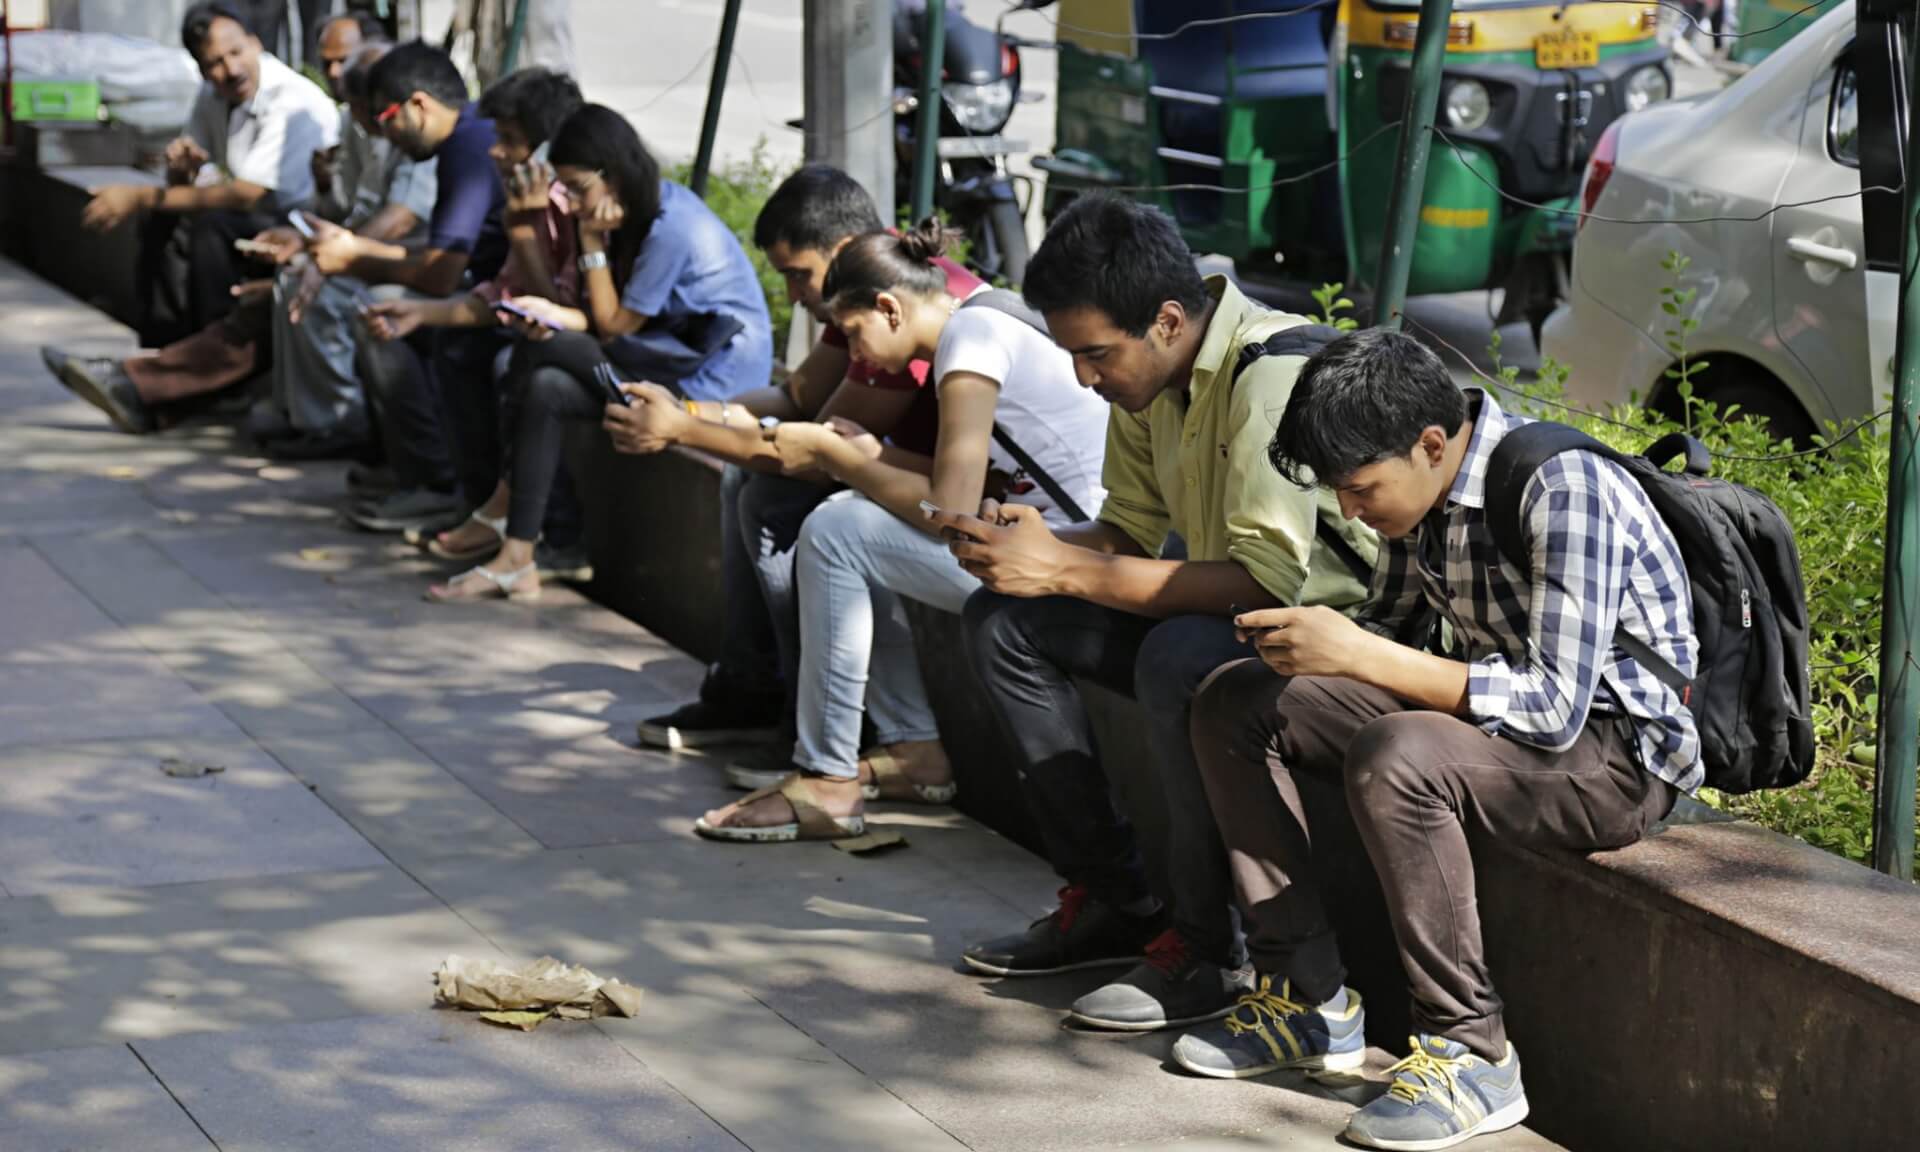 India’s New Intermediary Laws Give Social Media Companies More Power Than Necessary